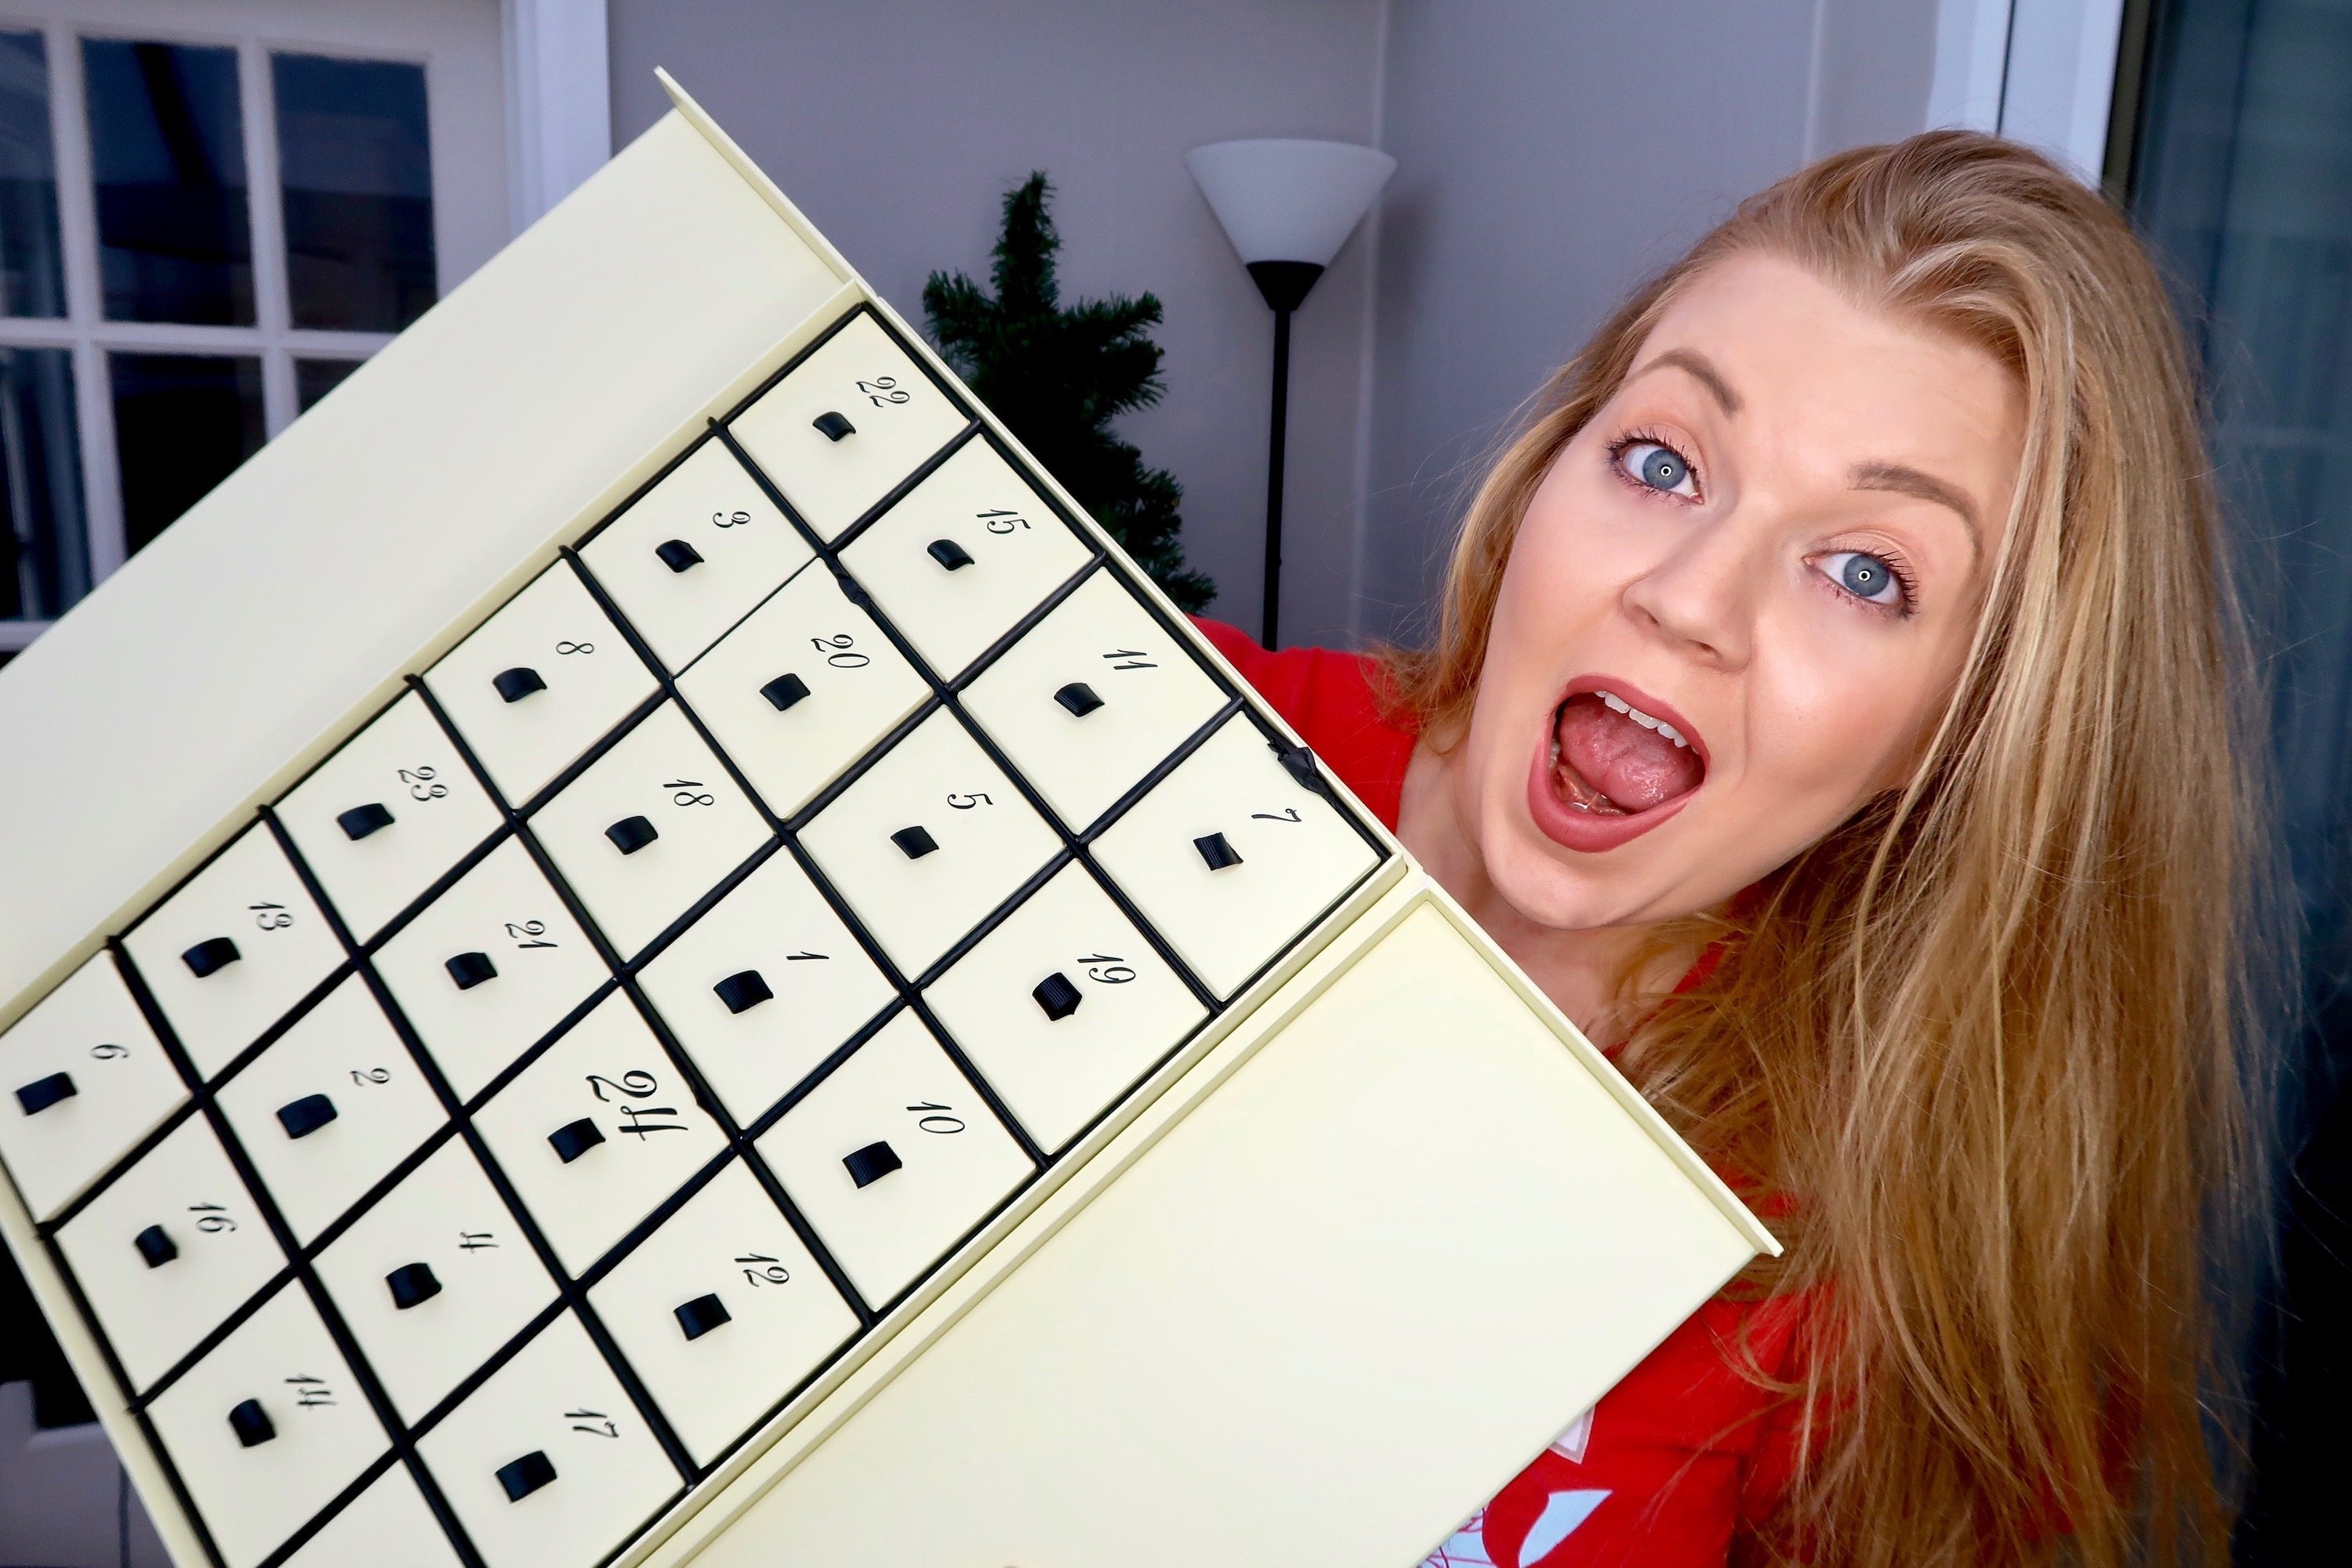 Aldi launch their Luxury Countdown to Christmas advent calendar, priced at £49.99 and a dupe of Jo Malone’s sold out £300 calendar. We unbox it to see if it’s worth the hype | Elle Blonde Luxury Lifestyle Destination Blog